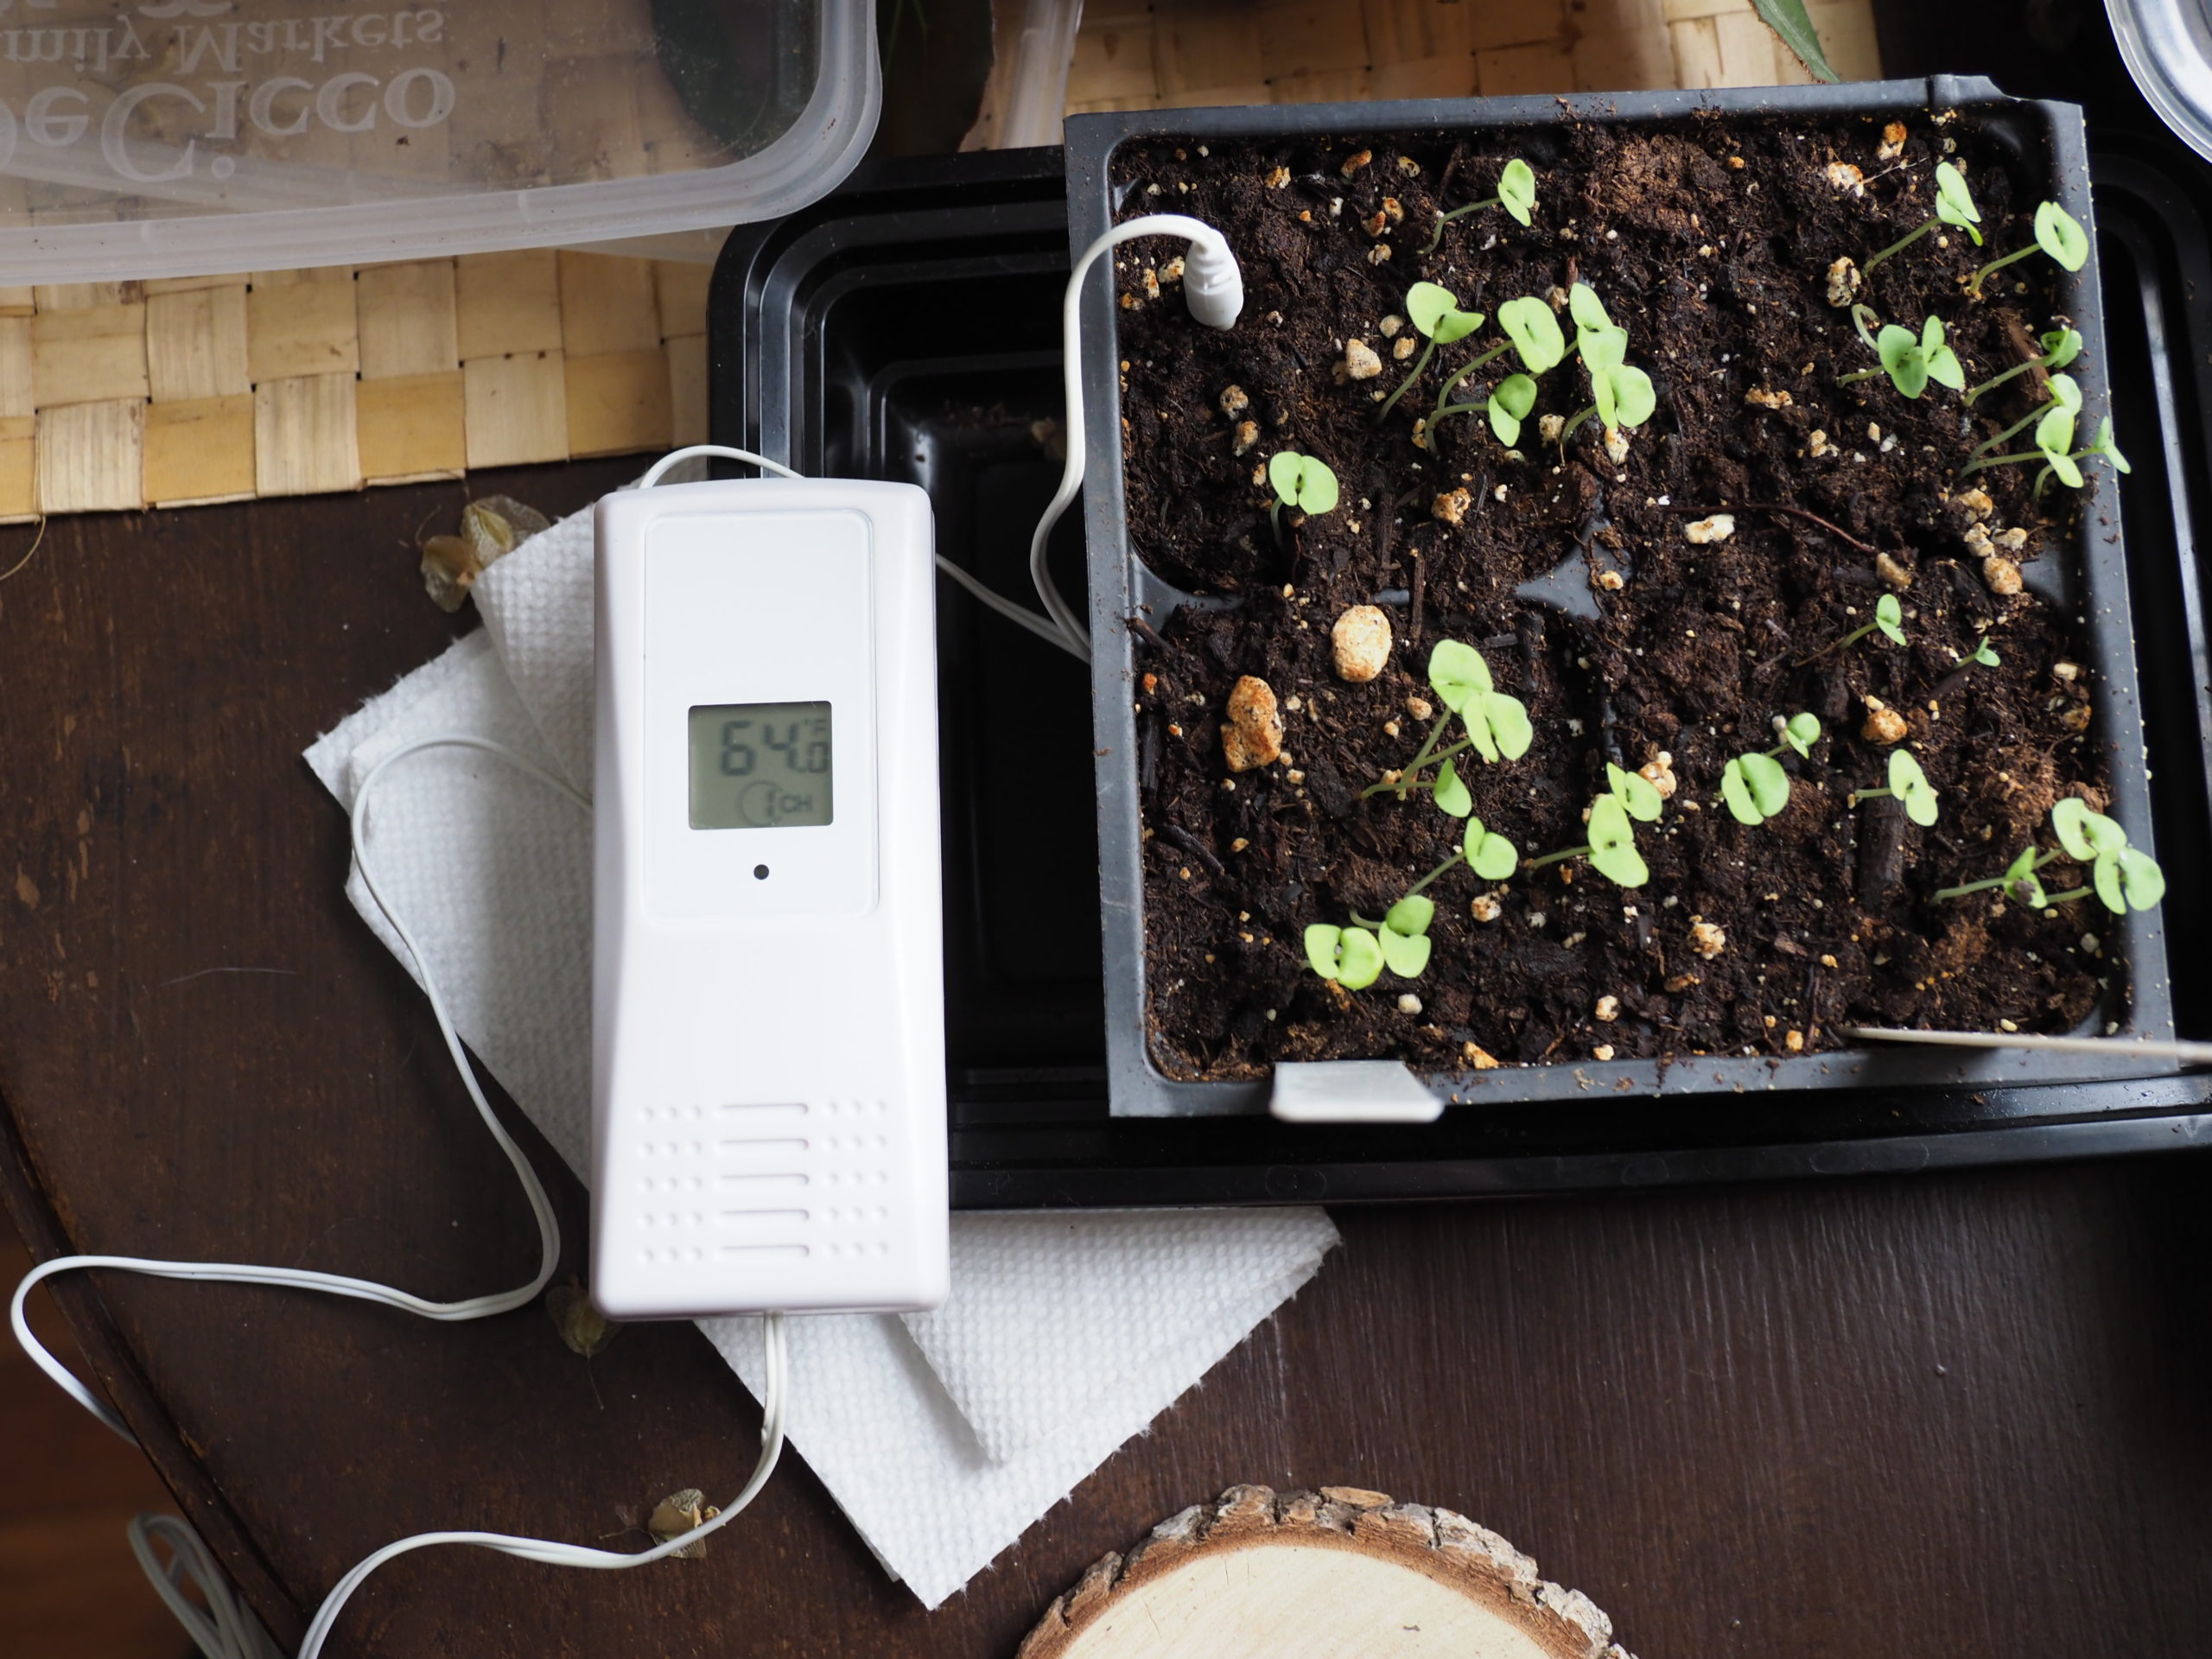 This inexpensive “remote” thermometer can be read from the internal screen (64.0 F) or it will transmit several hundred feet to an indoor receiver. This set up is waterproof and the “bulb” or sensor (in the soil) is on an 8-foot cord if the unit needs to be set away from the sensor.  These are basil seedlings germinated at 70-degree soil temperature but grown a bit cooler.